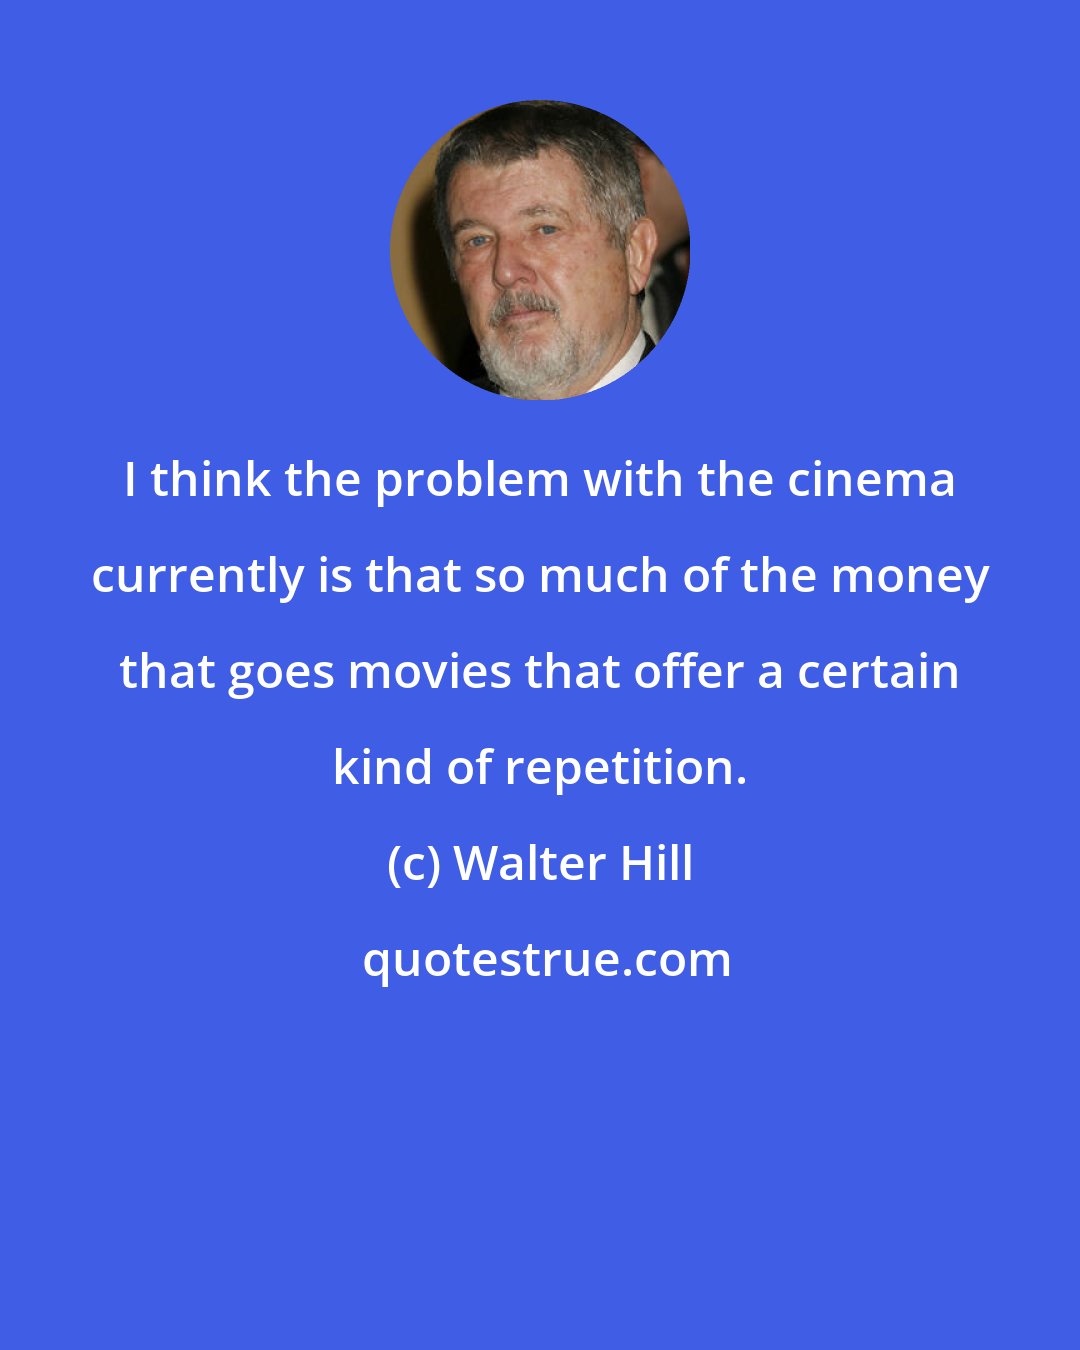 Walter Hill: I think the problem with the cinema currently is that so much of the money that goes movies that offer a certain kind of repetition.